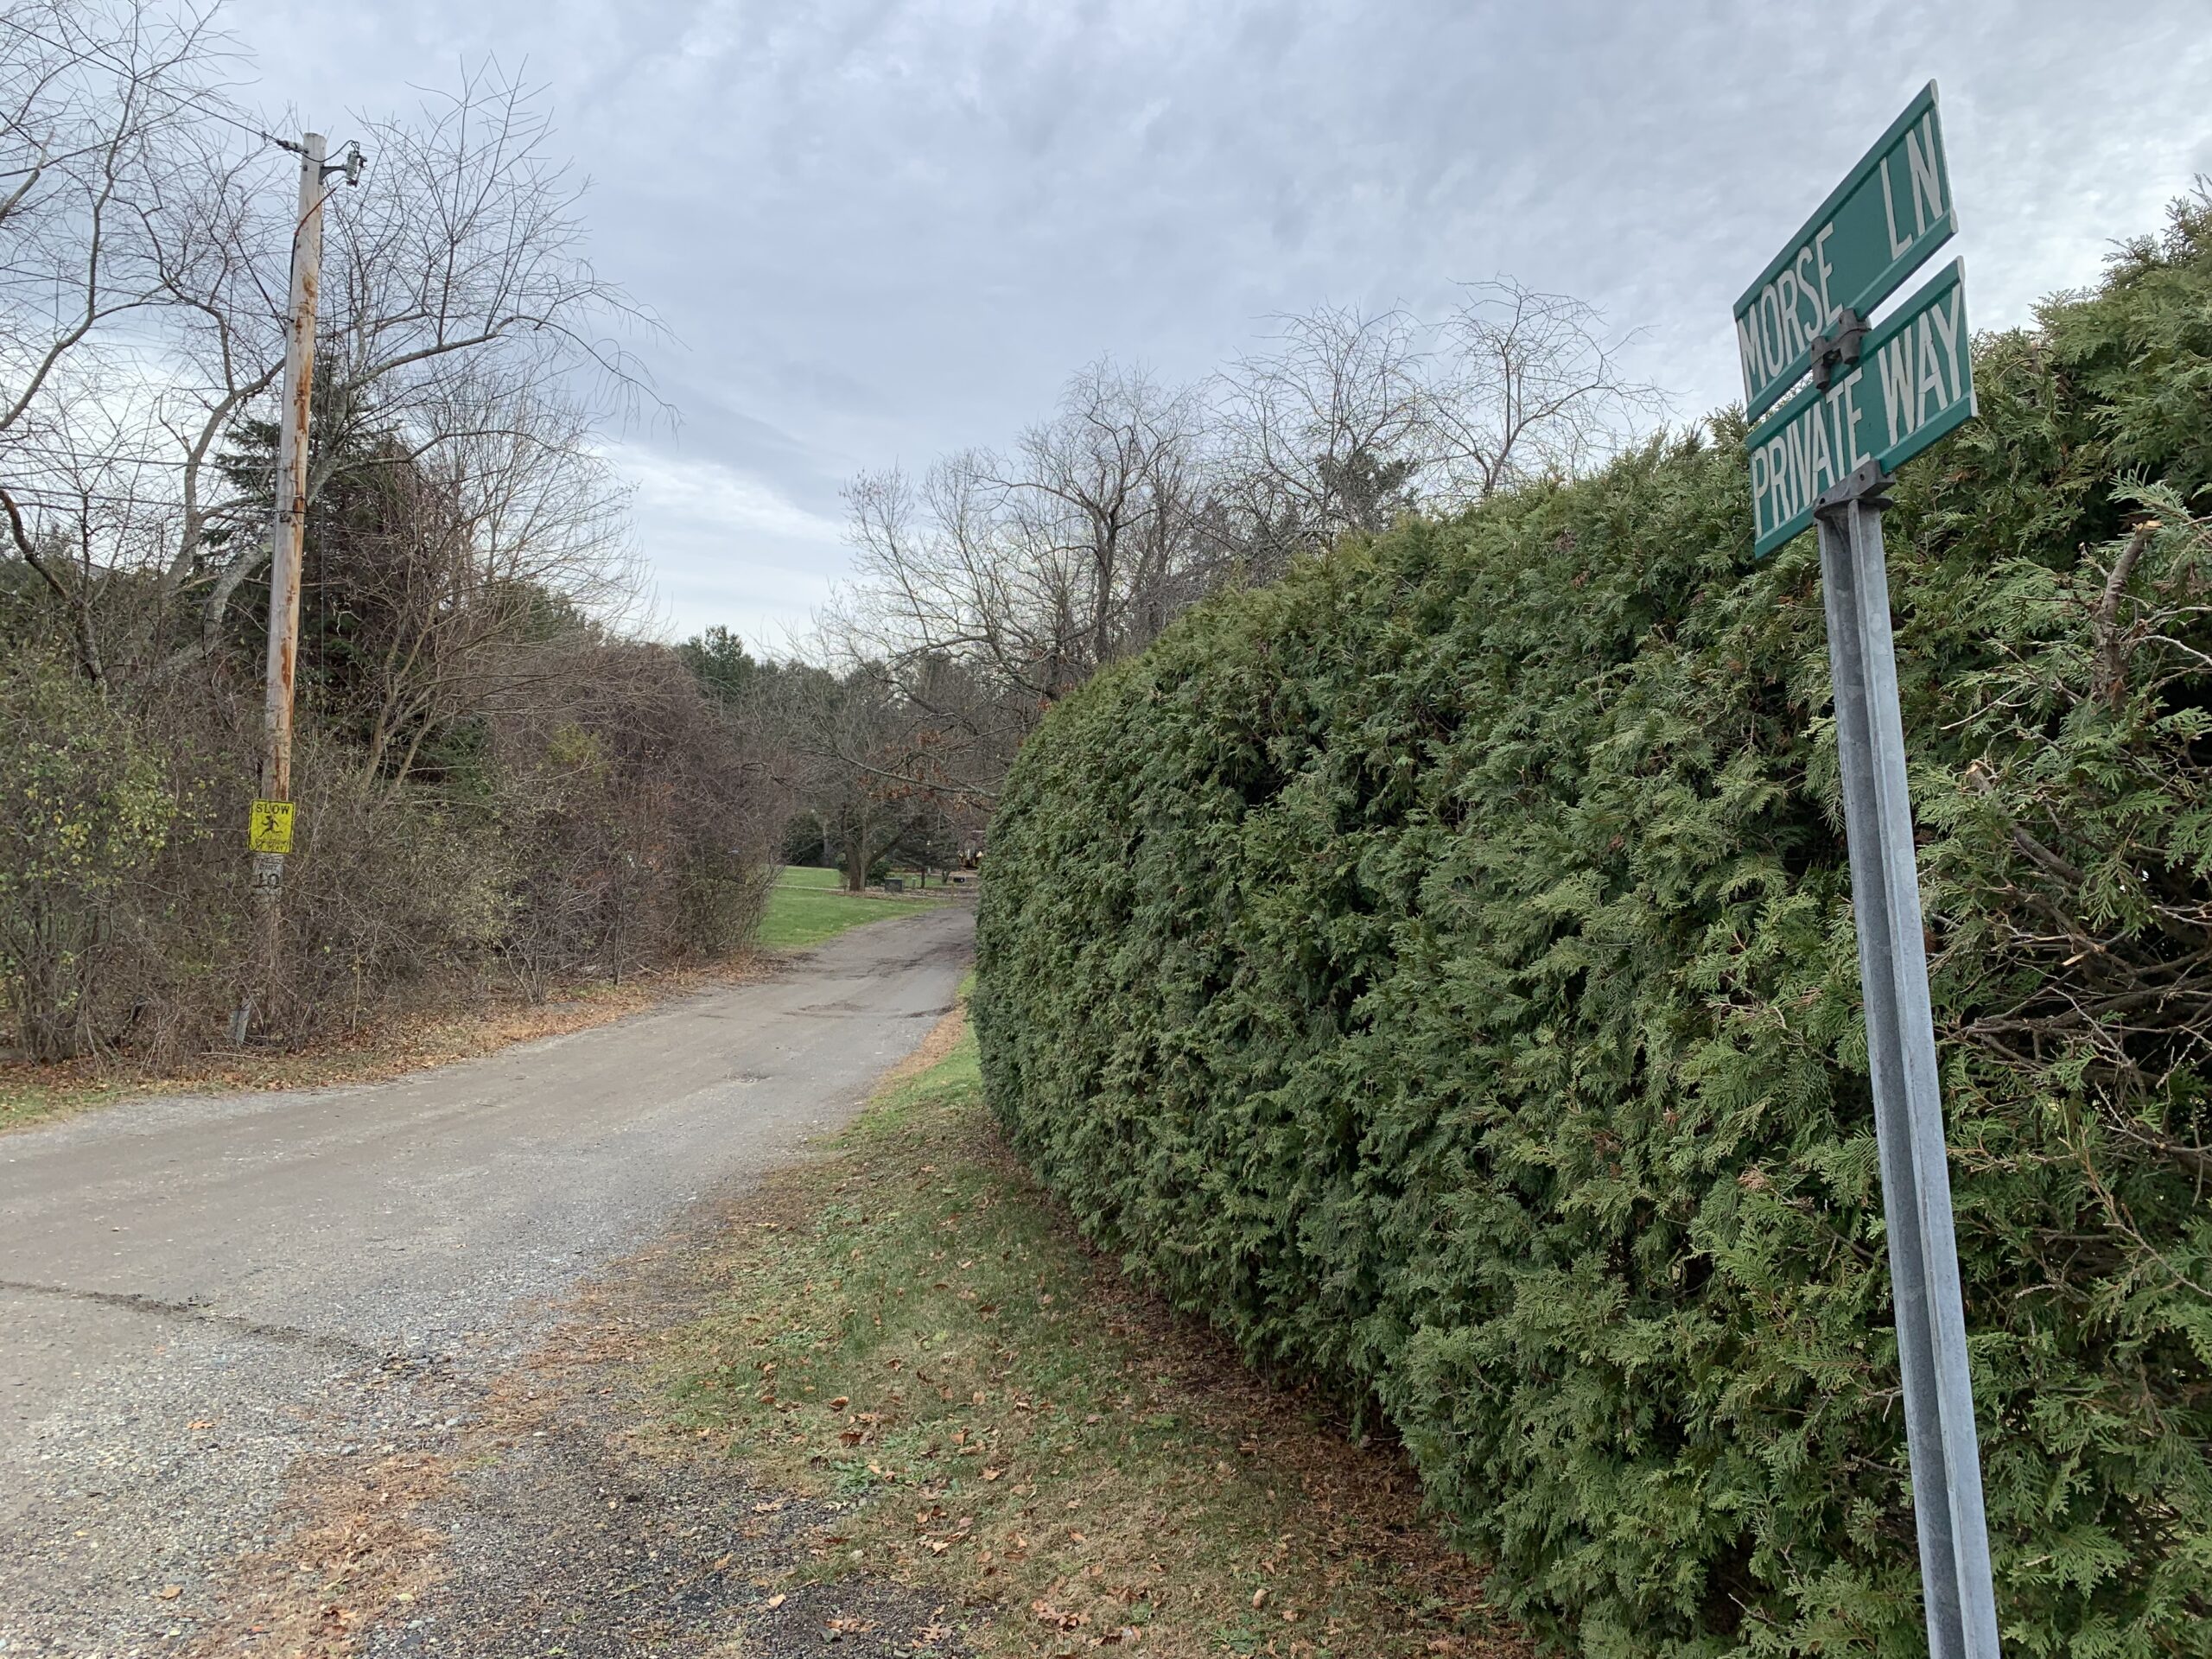 Planning Board makes progress on Morse Lane, continues hearing